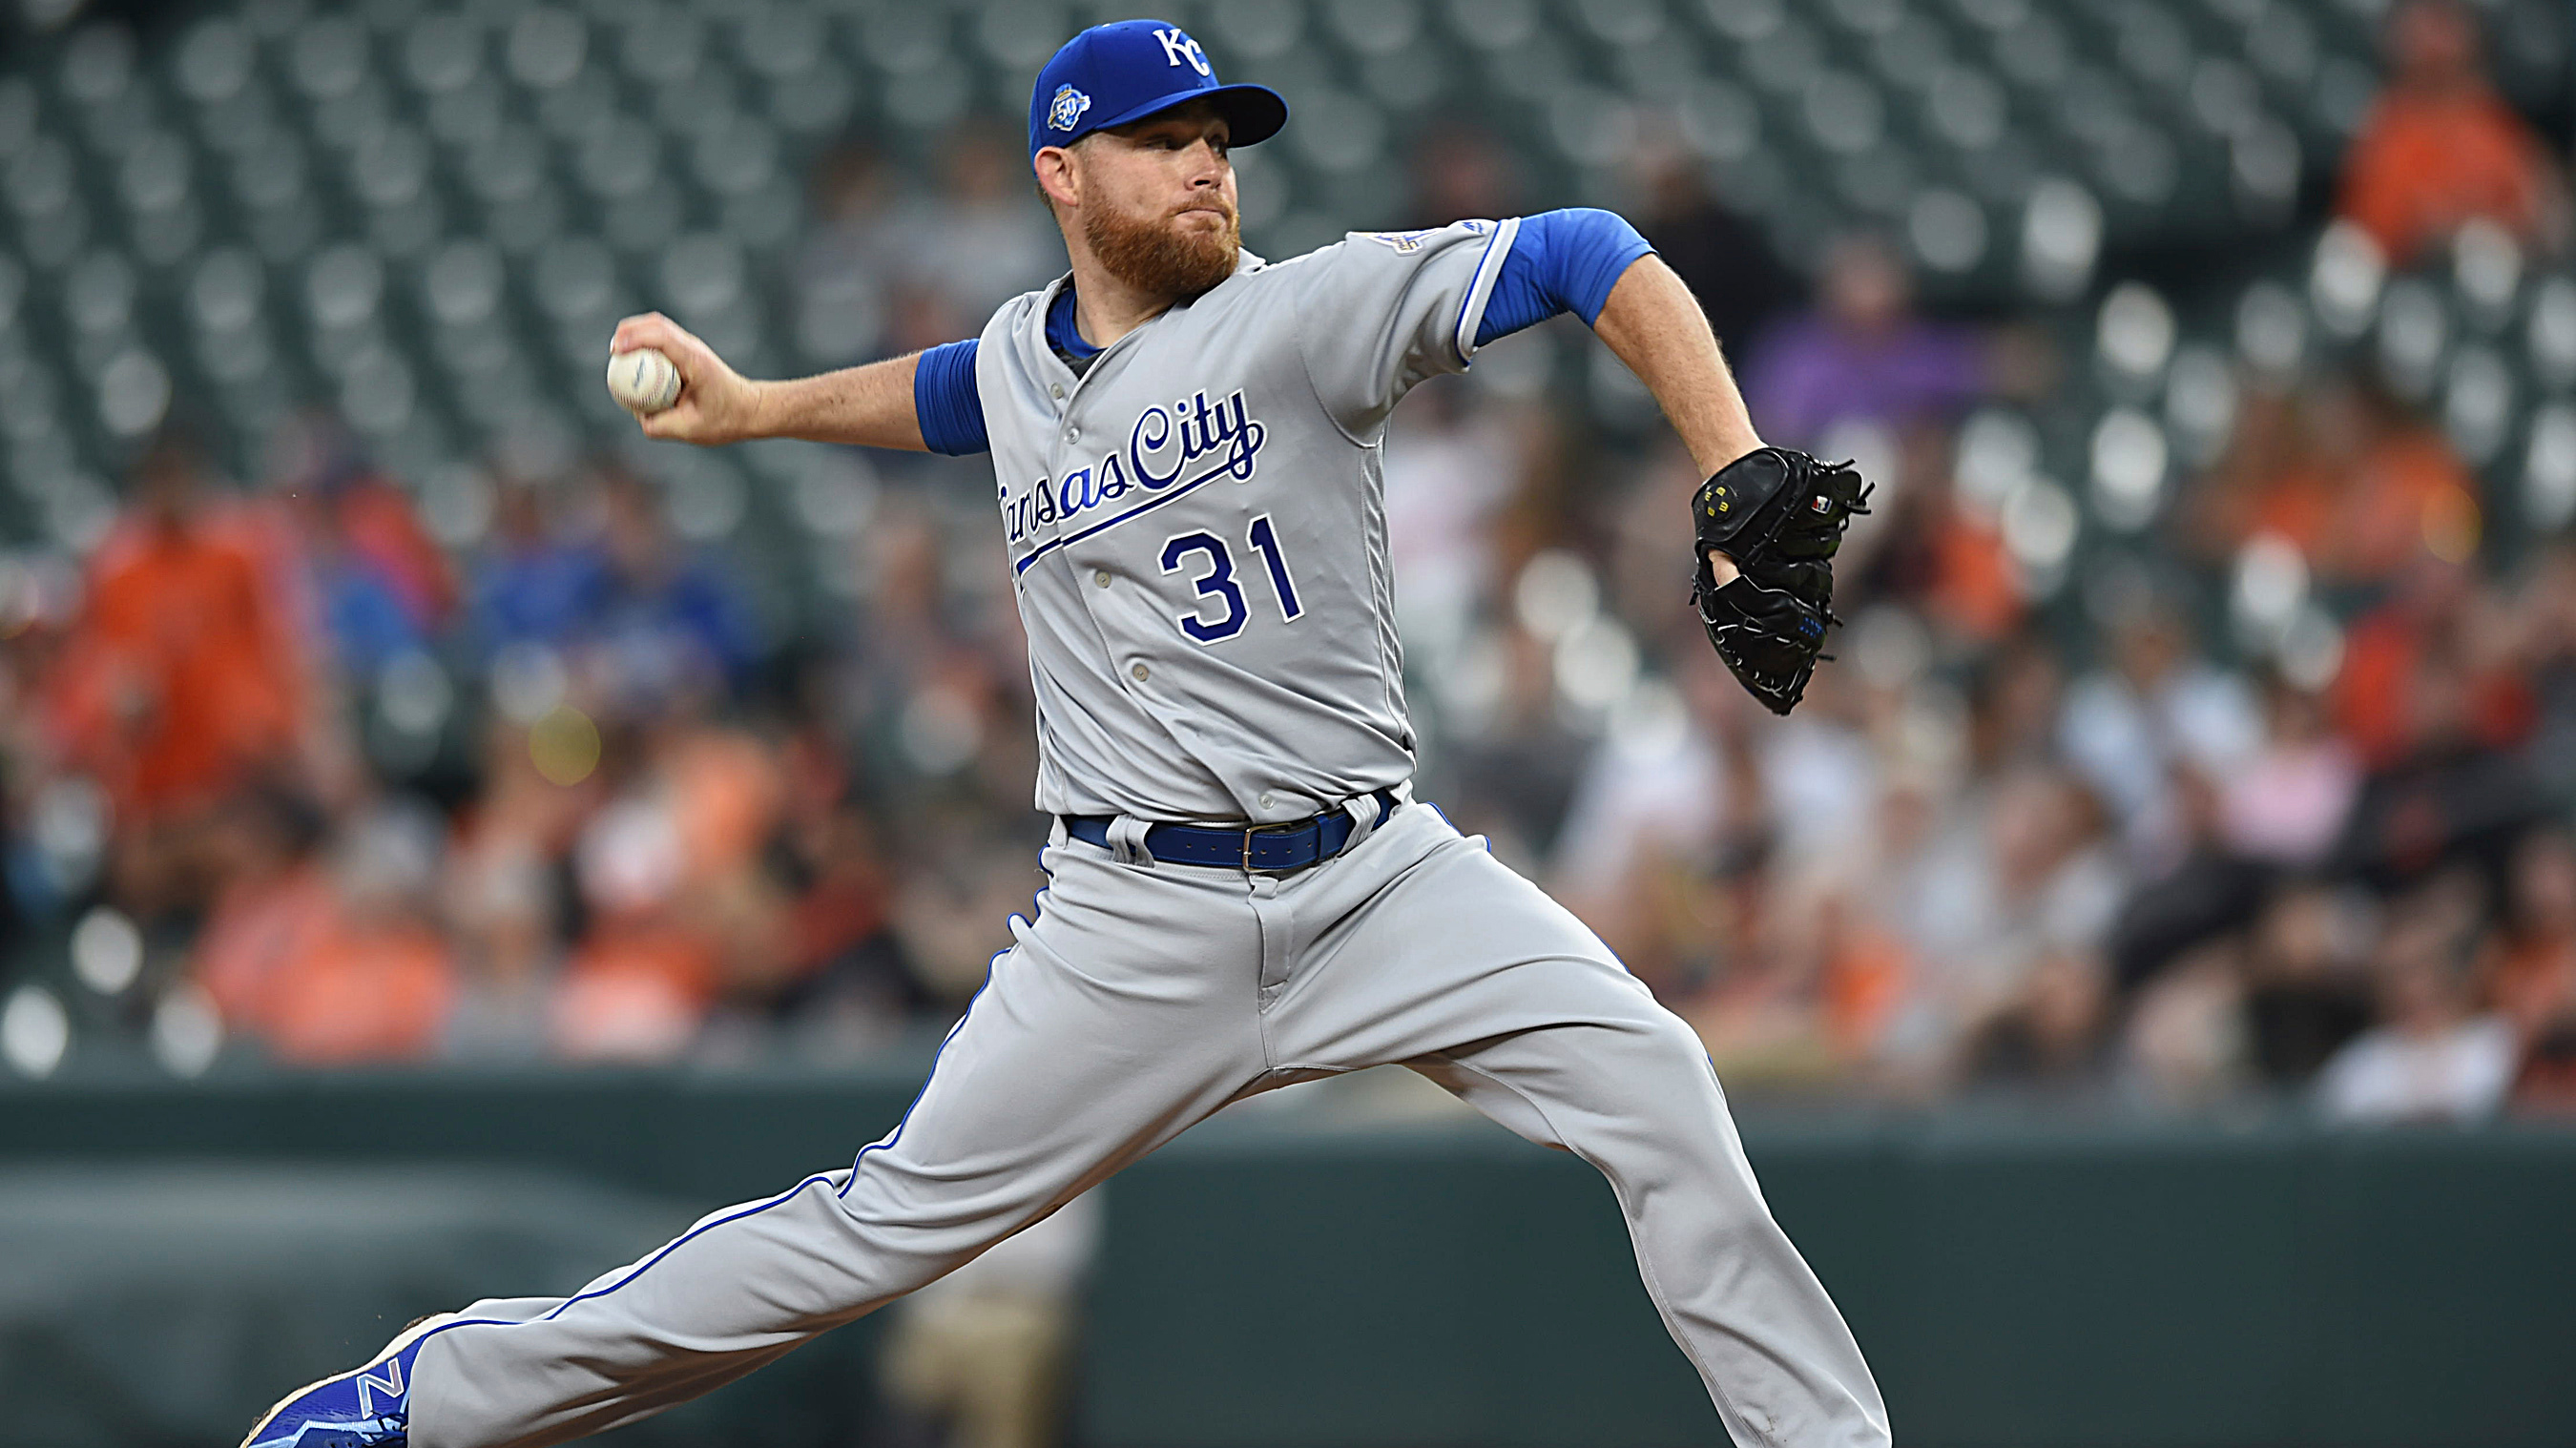 Royals drop rubber game after quick start in Baltimore